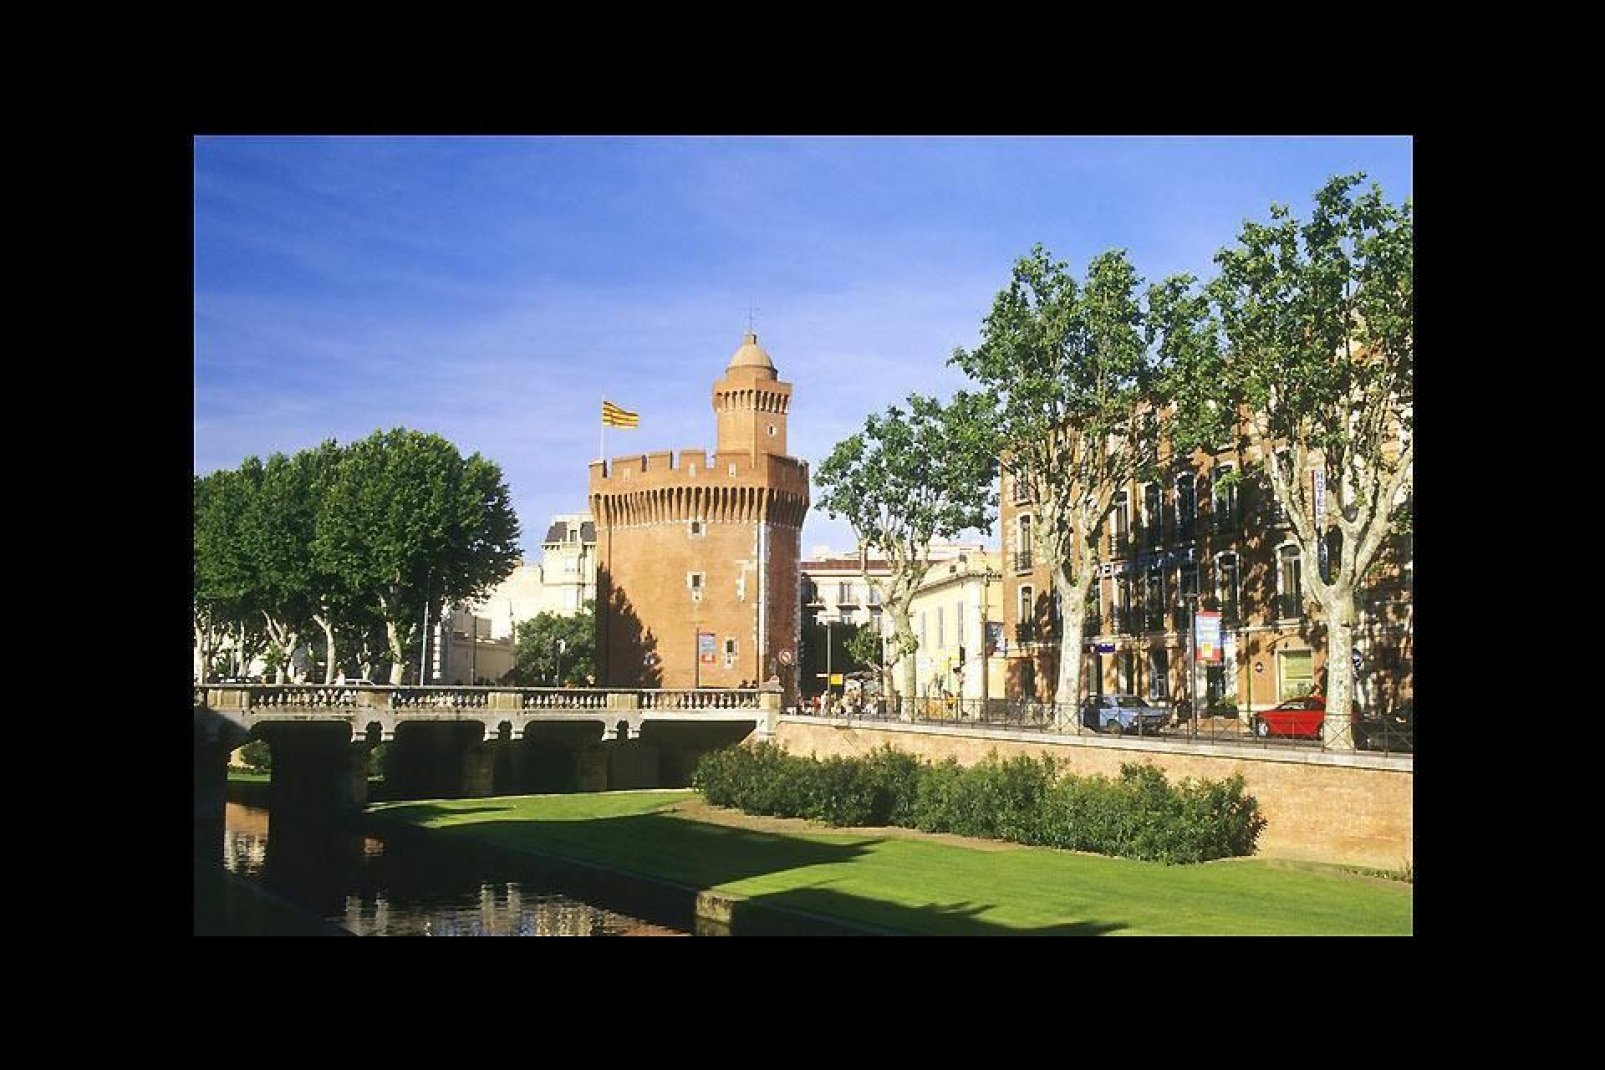 Today, the Castillet is home to the Catalan Museum of Arts and Popular Traditions. The Castillet is made up of the Large Castillet and the Small Castillet.